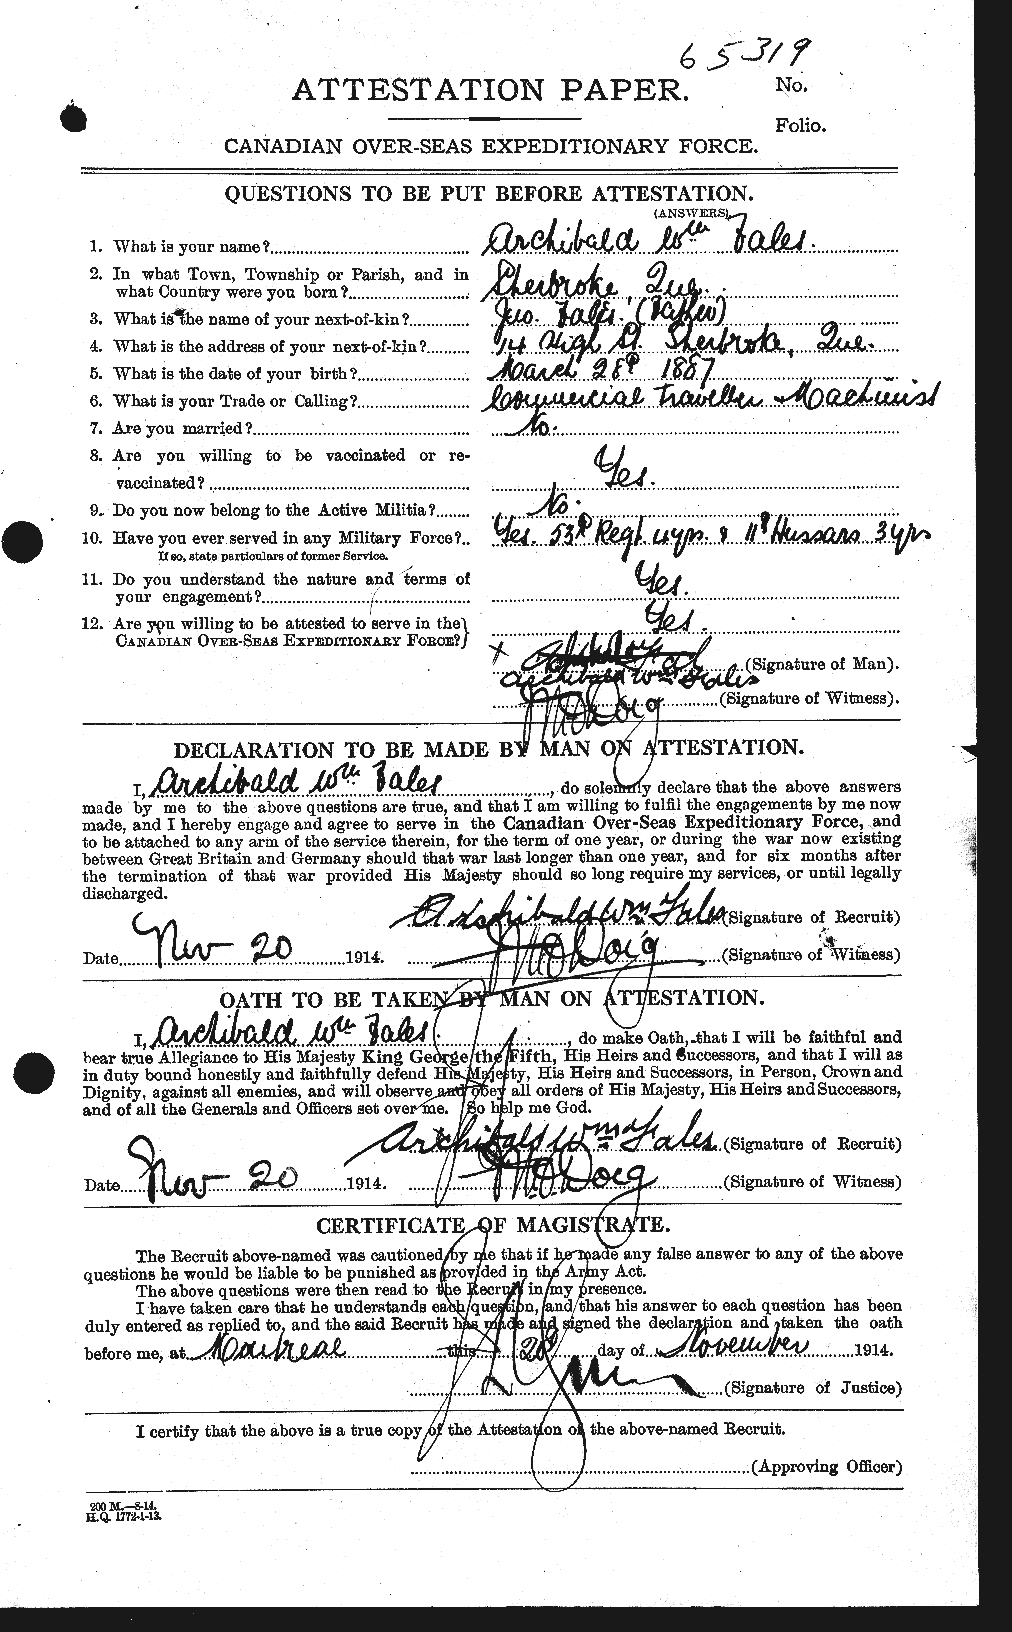 Personnel Records of the First World War - CEF 317030a